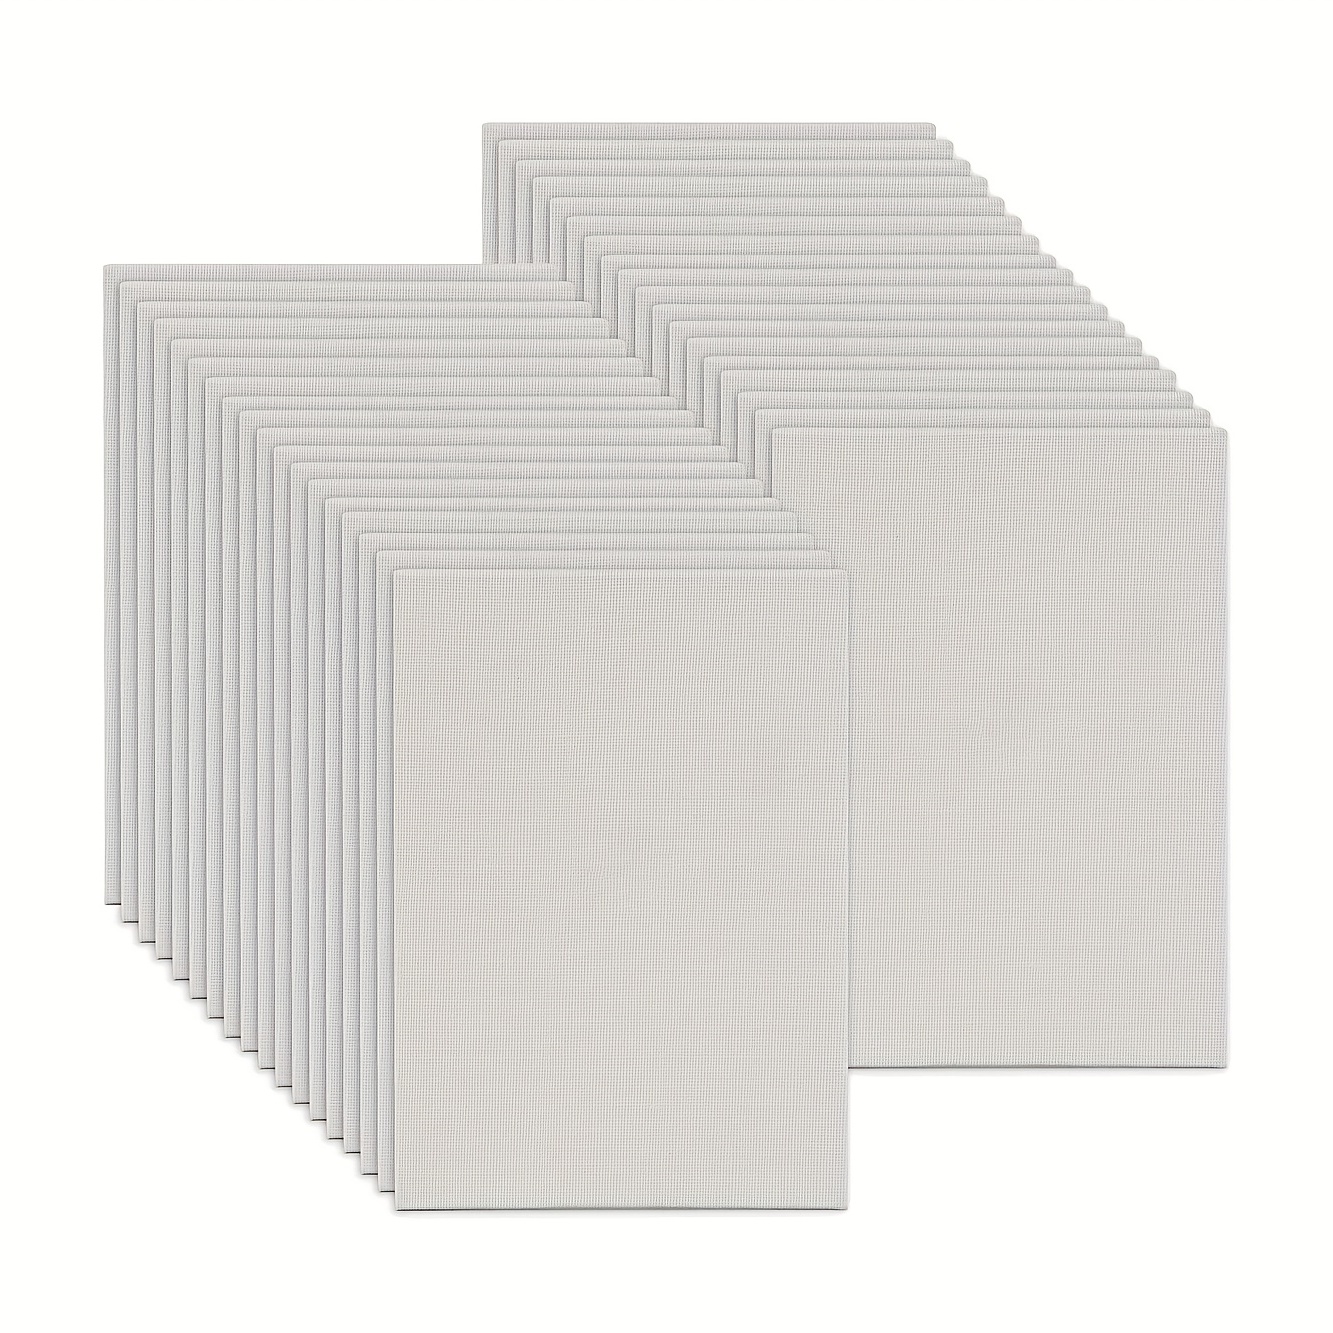  Mini Canvas 4x4 inch 24 Pack, Stretched Small Canvases for  Painting, 3/8 Inch Profile Blank Painting Canvas Square Canvas for Acrylics  Oil Watercolor Painting Craft Art Project Paint Party Favors